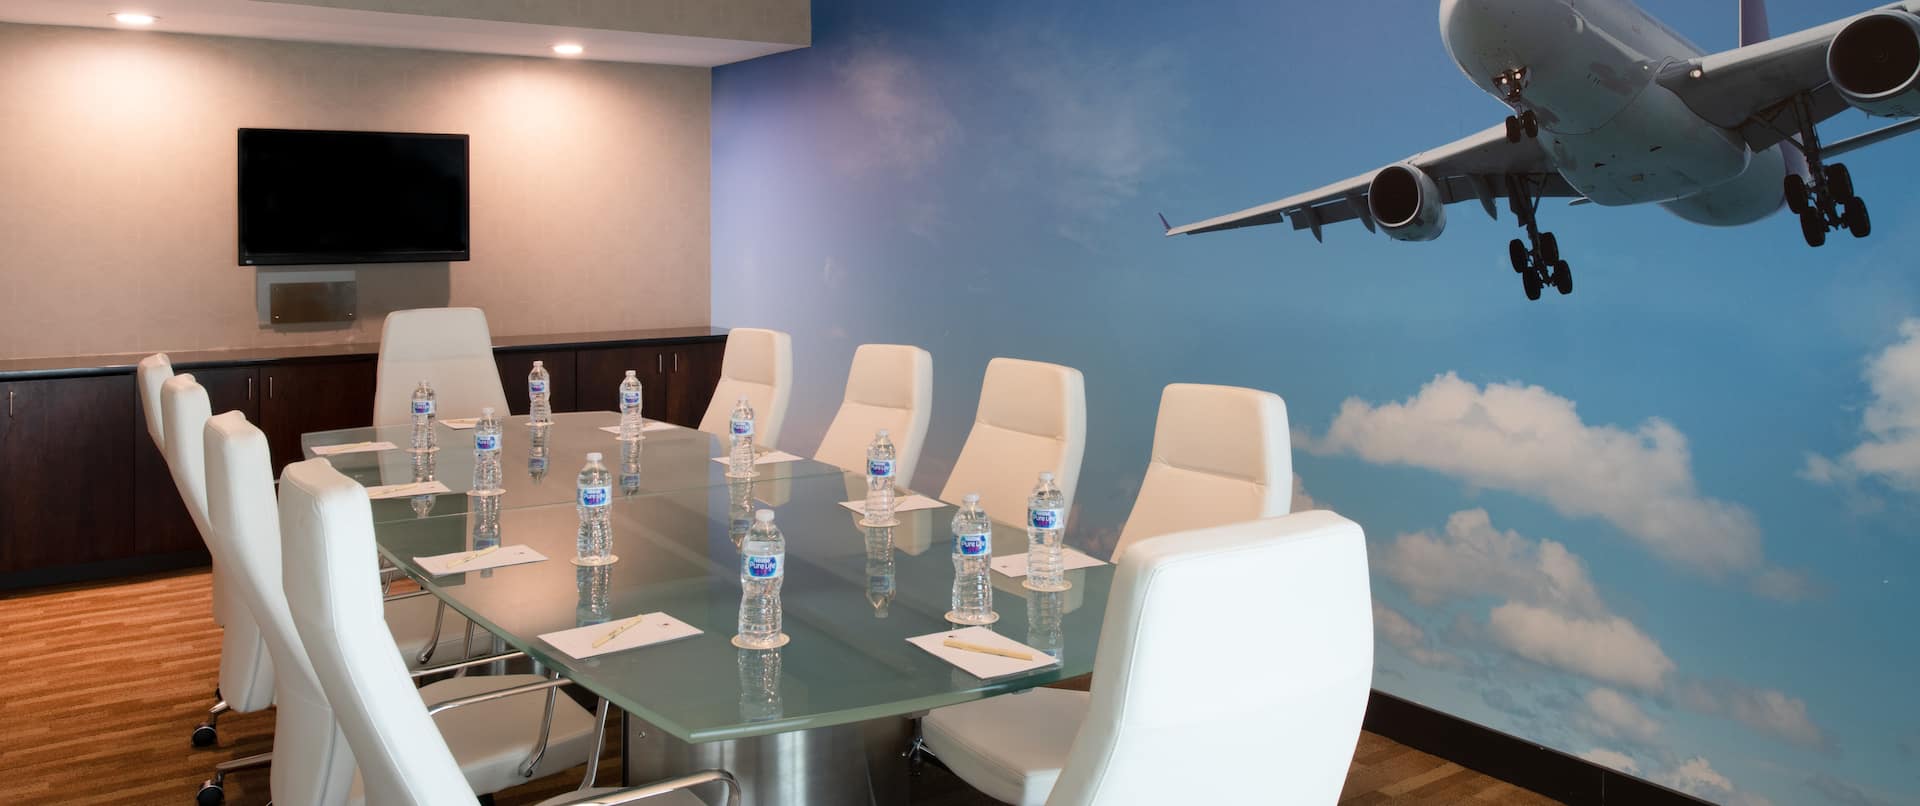 Private Meeting Room with Boardroom Table